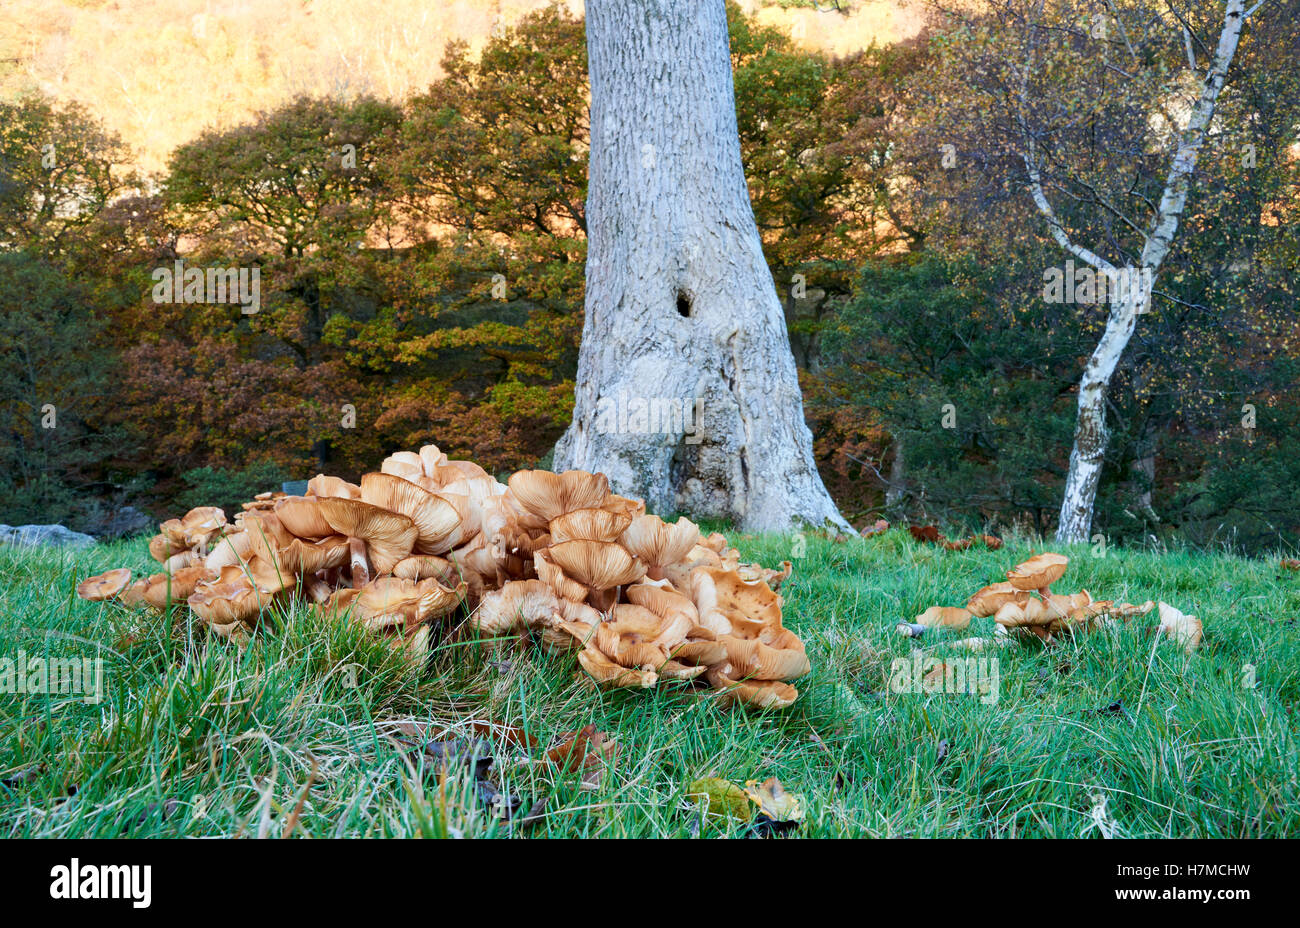 Elan Valley, Powys, Wales. 6th November 2016. Large eruption of Honey Fungus Armillaria sp. on stumps of Horse Chestnuts that were cut down a few years earlier. Phill Thomas/Alamy Live News Stock Photo